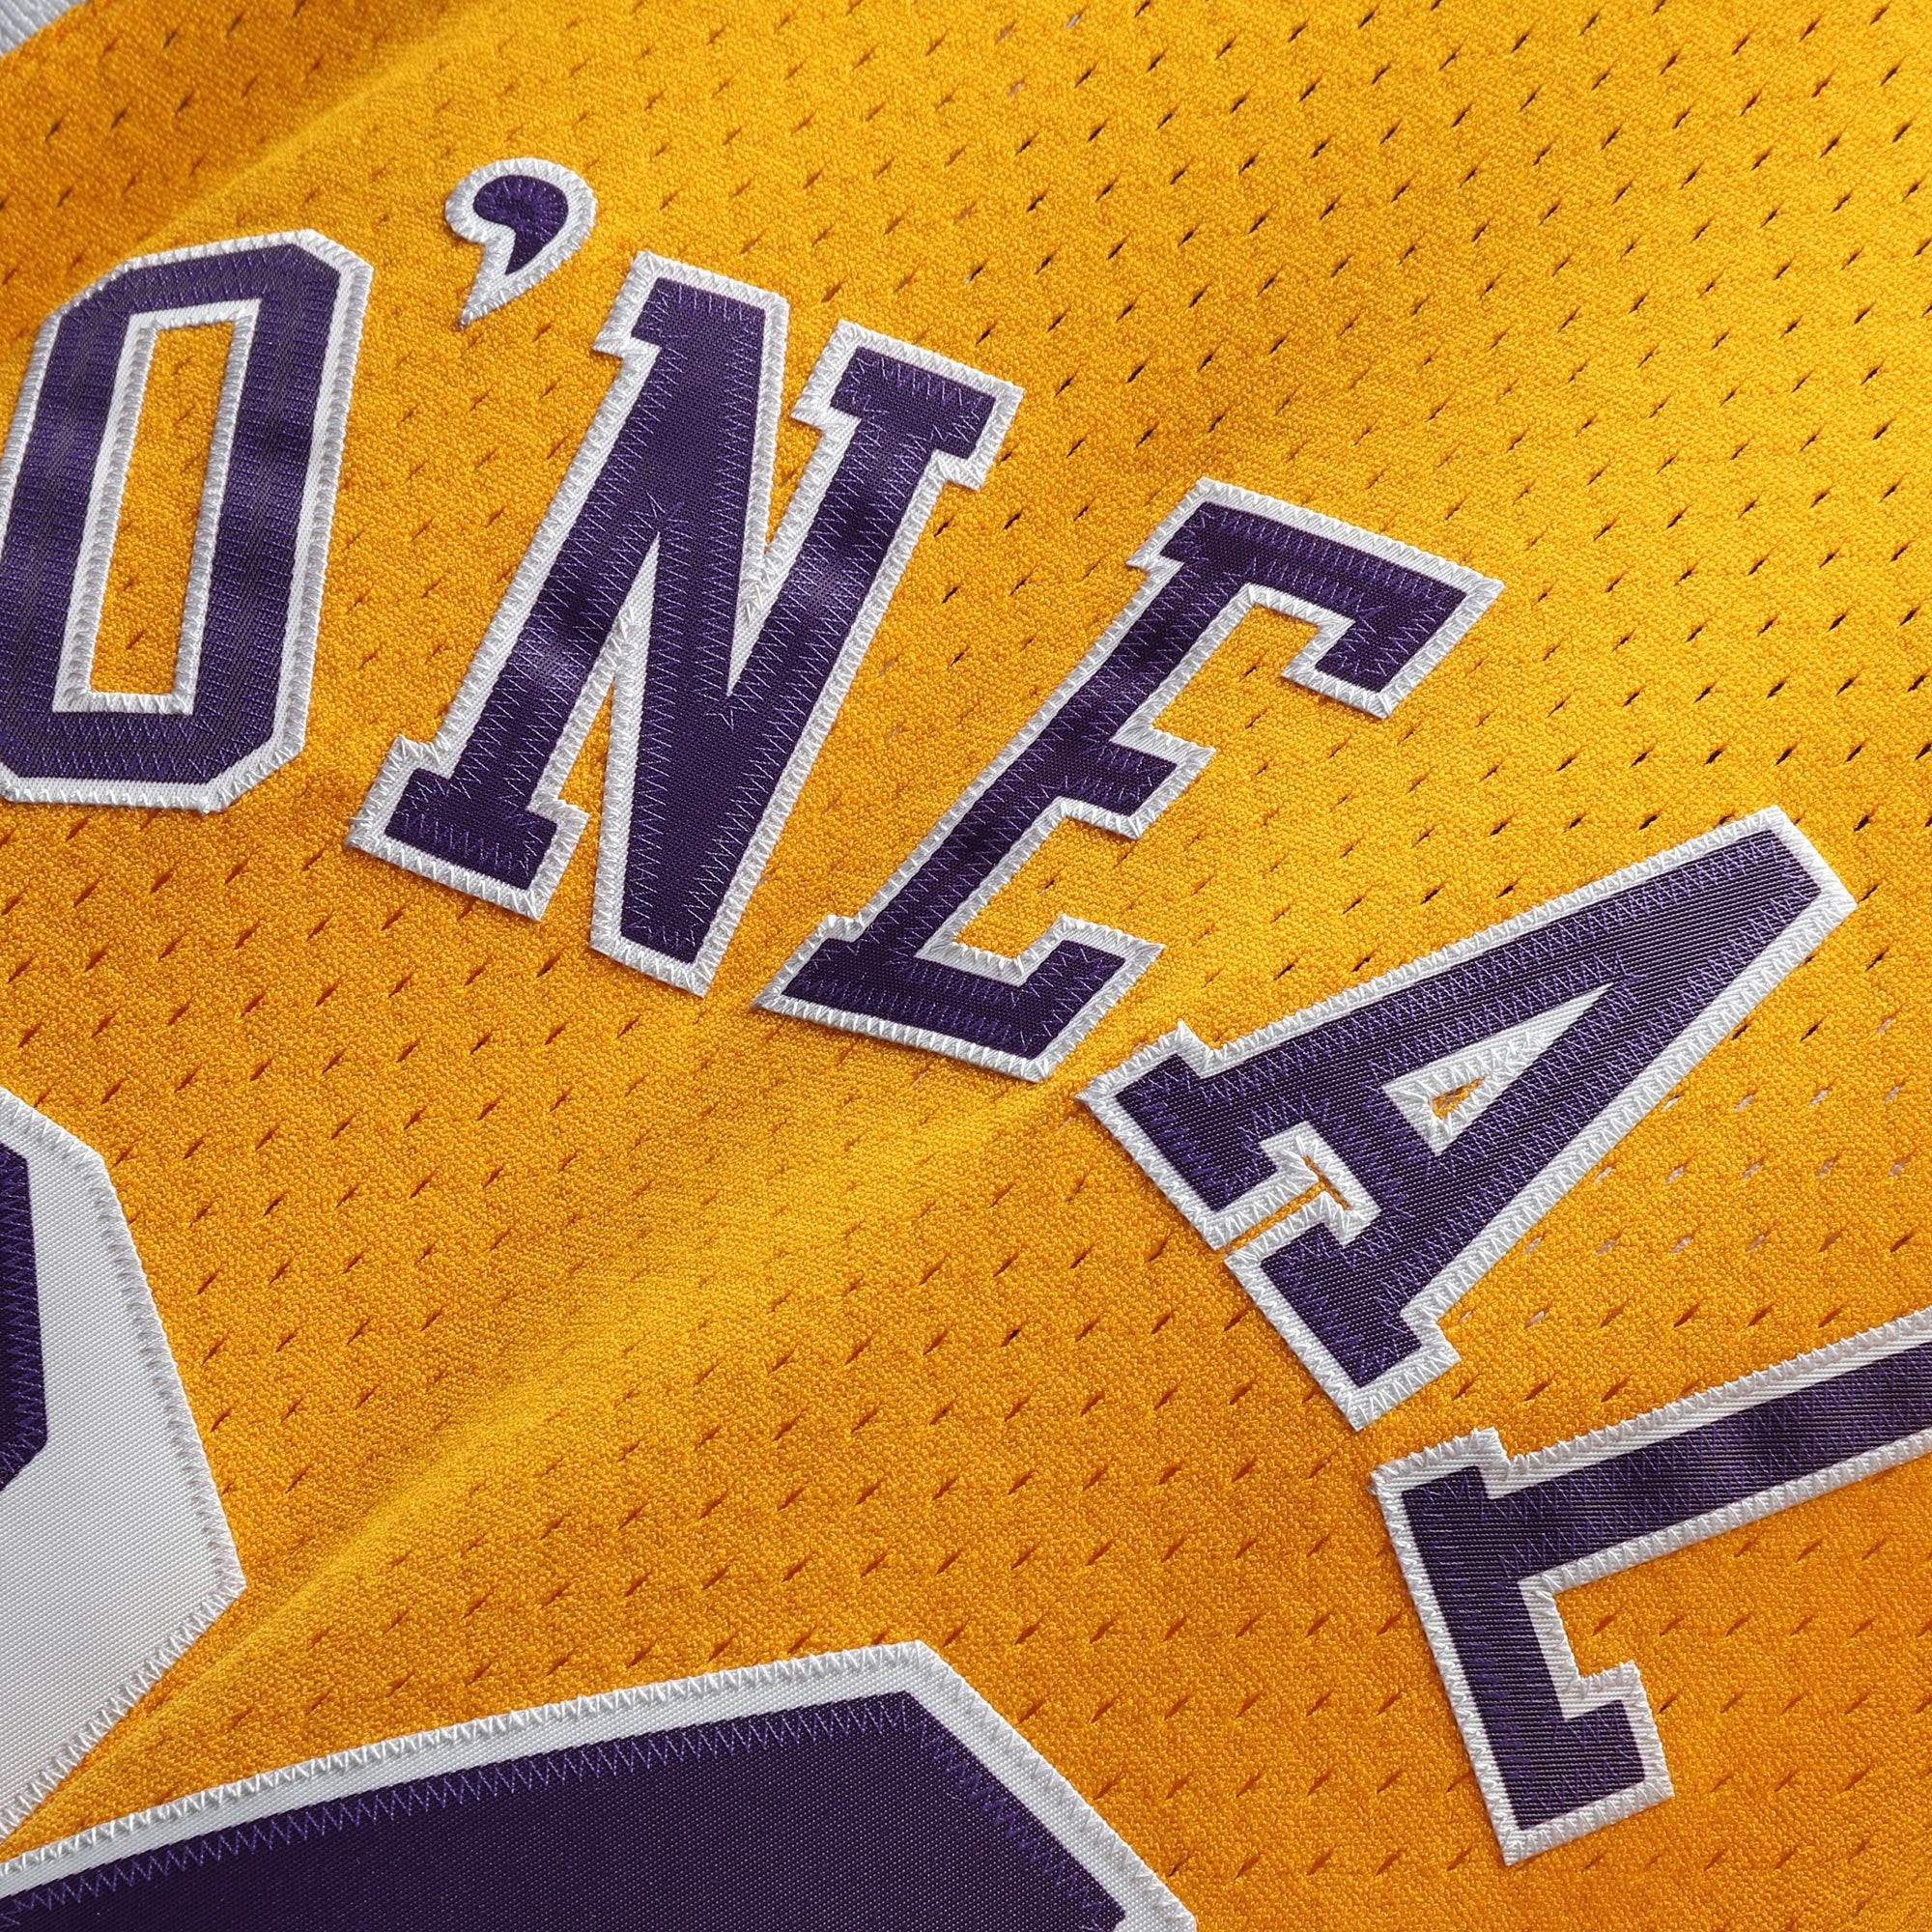 Mitchell & Ness NBA Swingman Jersey Los Angeles Lakers Home 1996-97  Shaquille O'Neal #34 Yellow - YELLOW